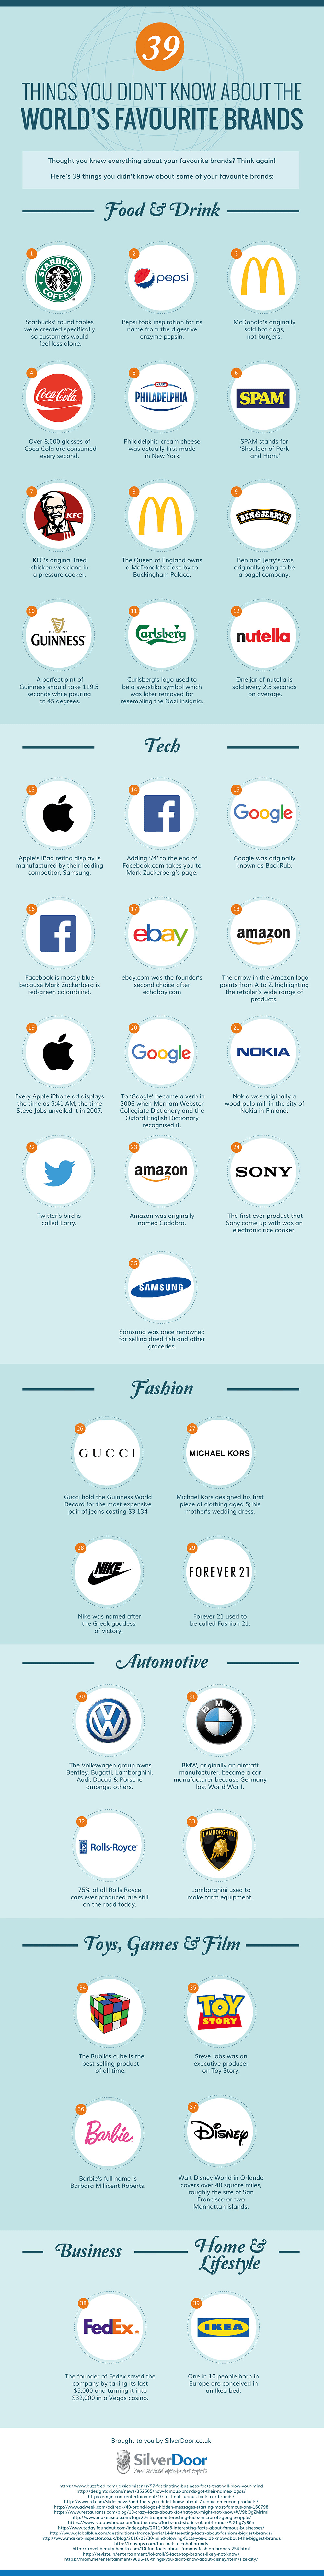 Thought you knew everything about your favourite brands? Think again! Here are 39 things you didn’t know about some of your favourite brands, including Apple, Google, Facebook, Twitter, Amazon, Coca-Cola, KFC, and many more: